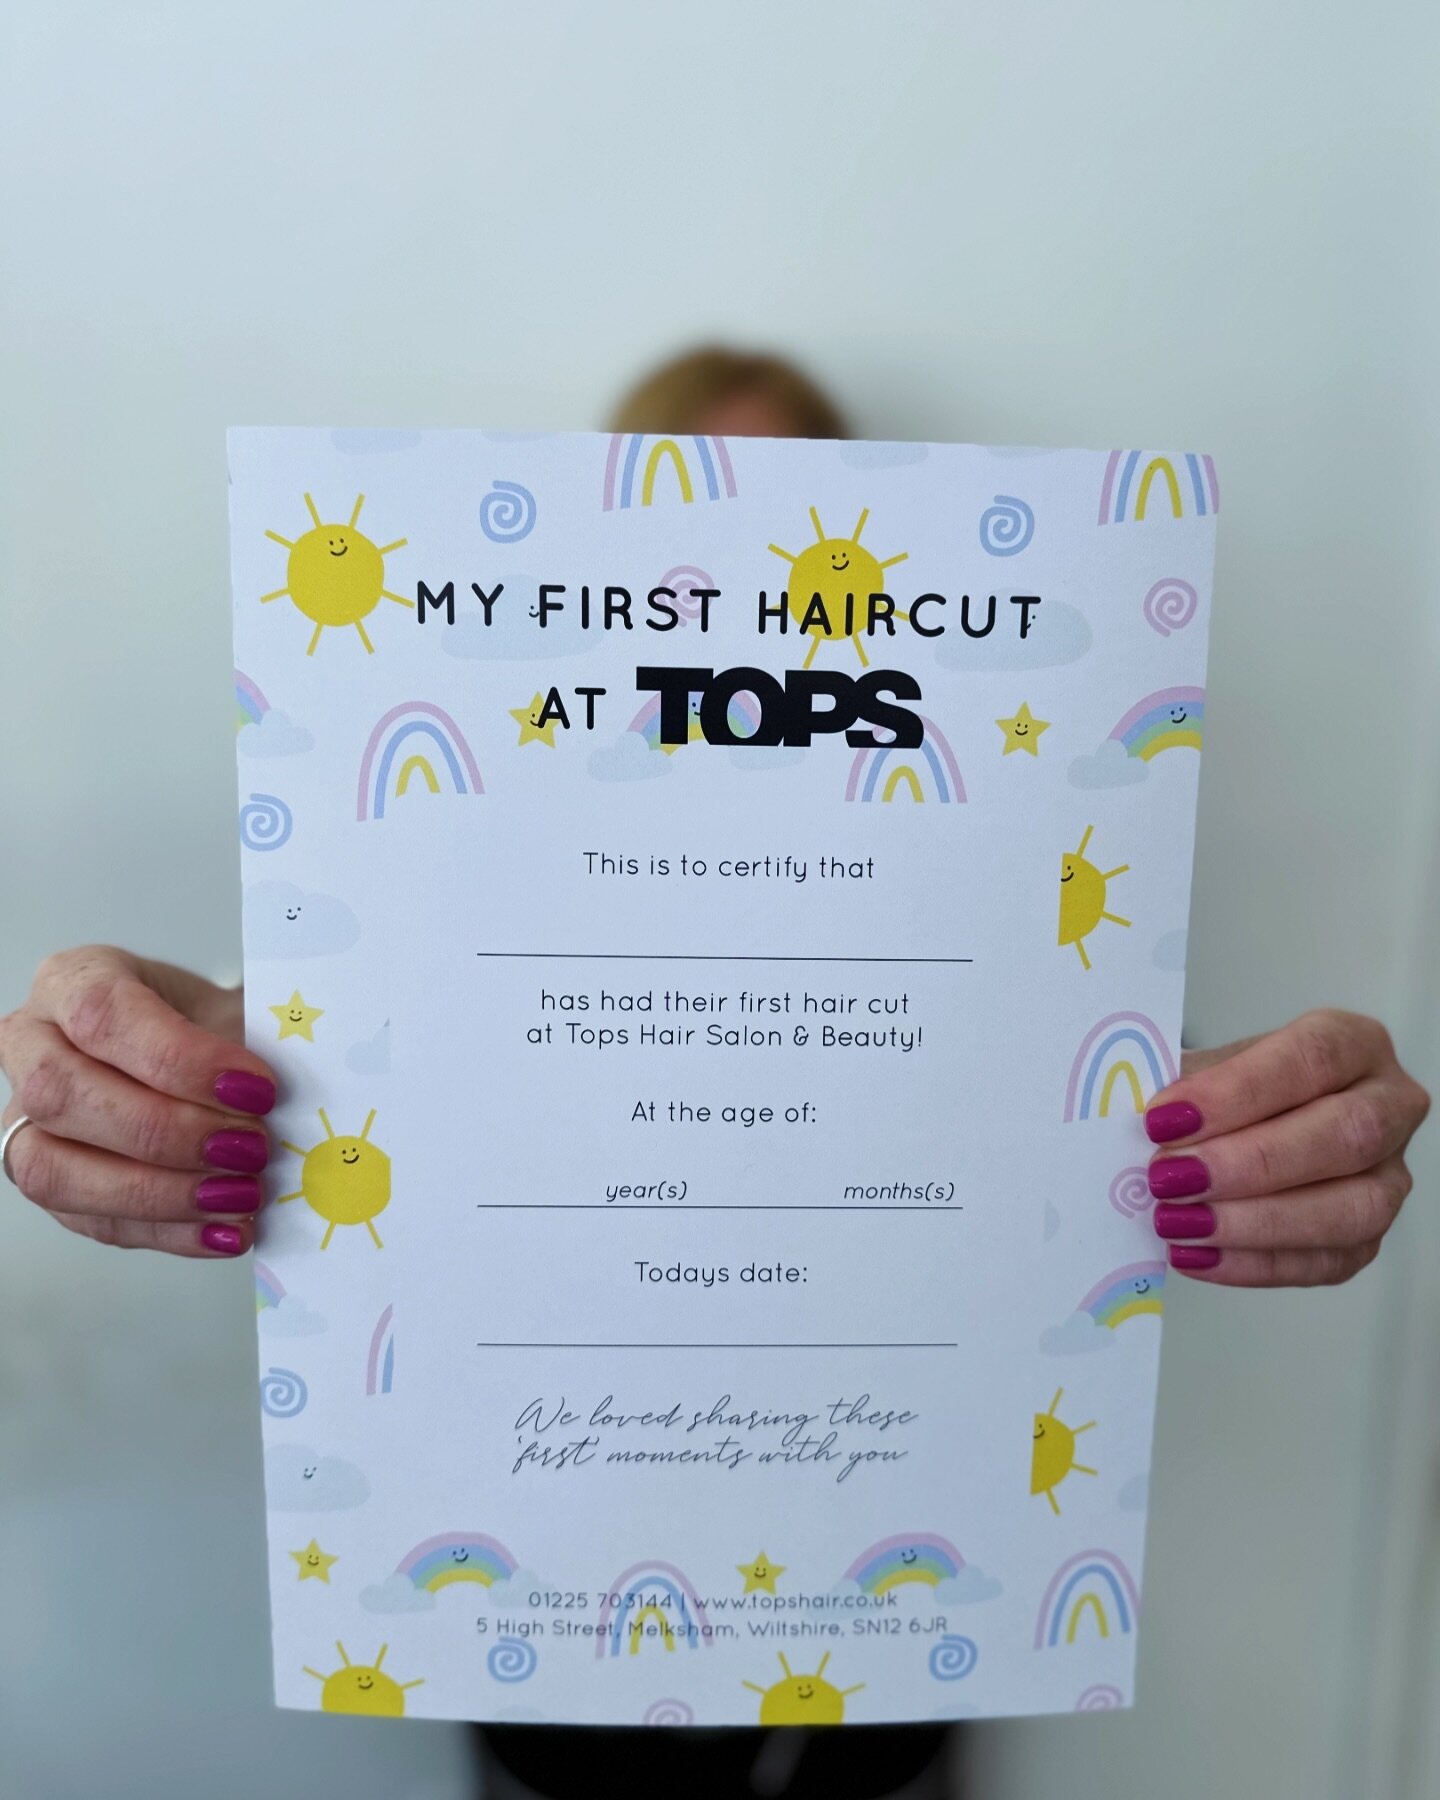 Capturing the milestone of the very first haircut at Tops Hair Salon &amp; Beauty! Celebrating the little ones with these adorable certificates ✂️🎉 

#FirstHaircut #TopsHairSalon #LittleOnes #MilestoneMoment #Melksham